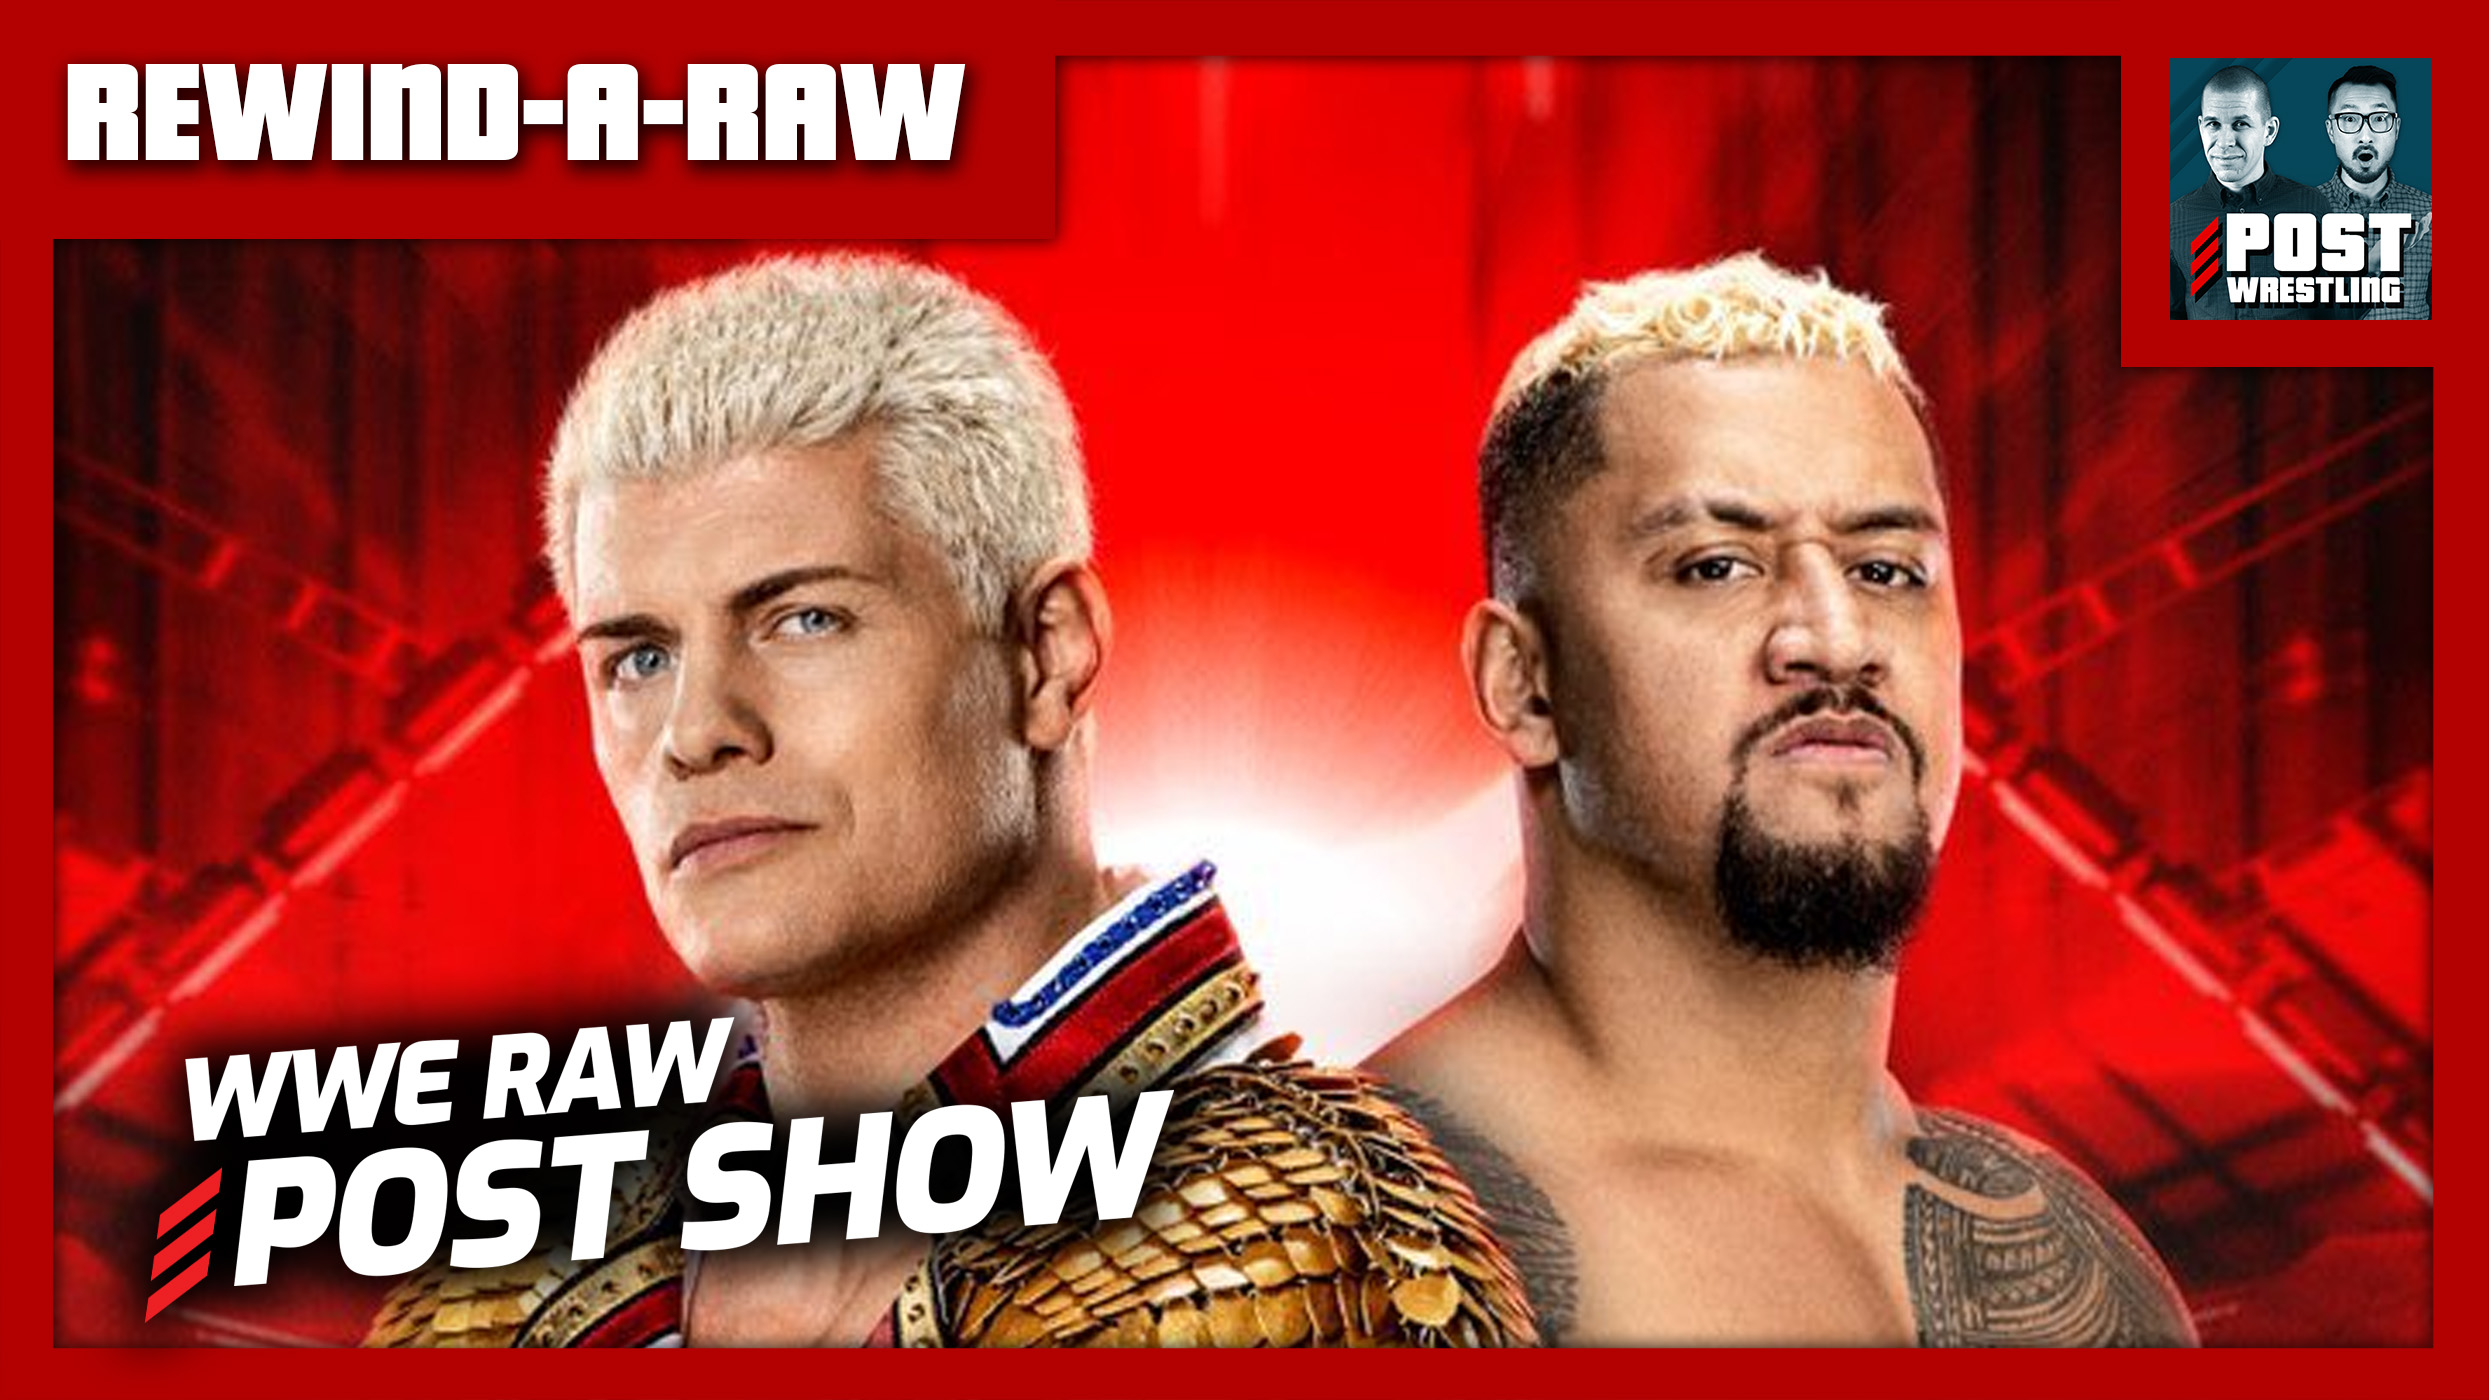 LIVE at 11 p.m. ET: WWE Raw 3/27/23 POST Show | REWIND-A-RAW - POST Wrestling | WWE AEW NXT NJPW Podcasts, News, Reviews